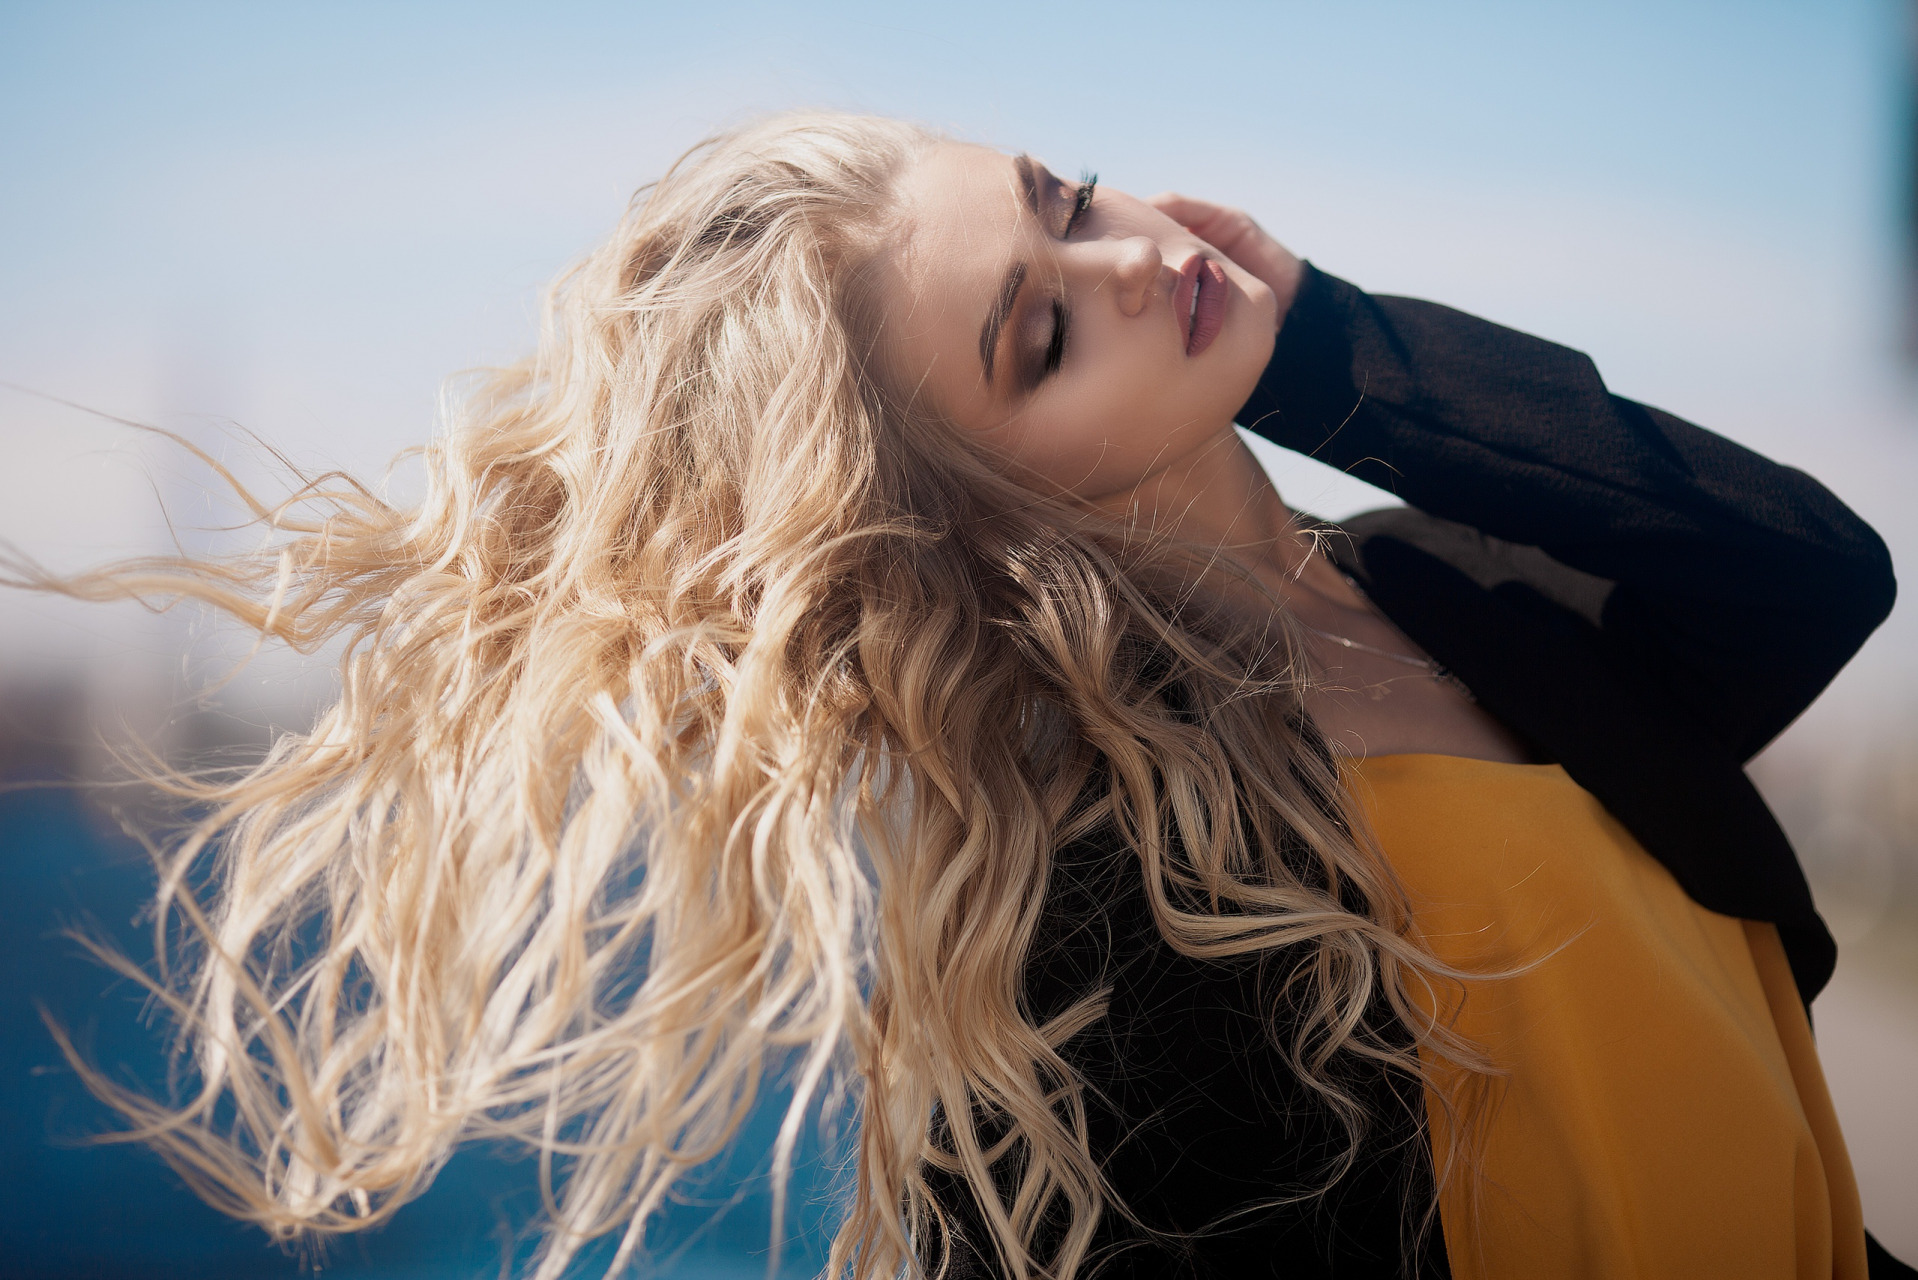 People 1918x1280 women photography touching face caressing open mouth wavy hair hair blowing in the wind closed eyes makeup model hair   blonde messy hair white hair